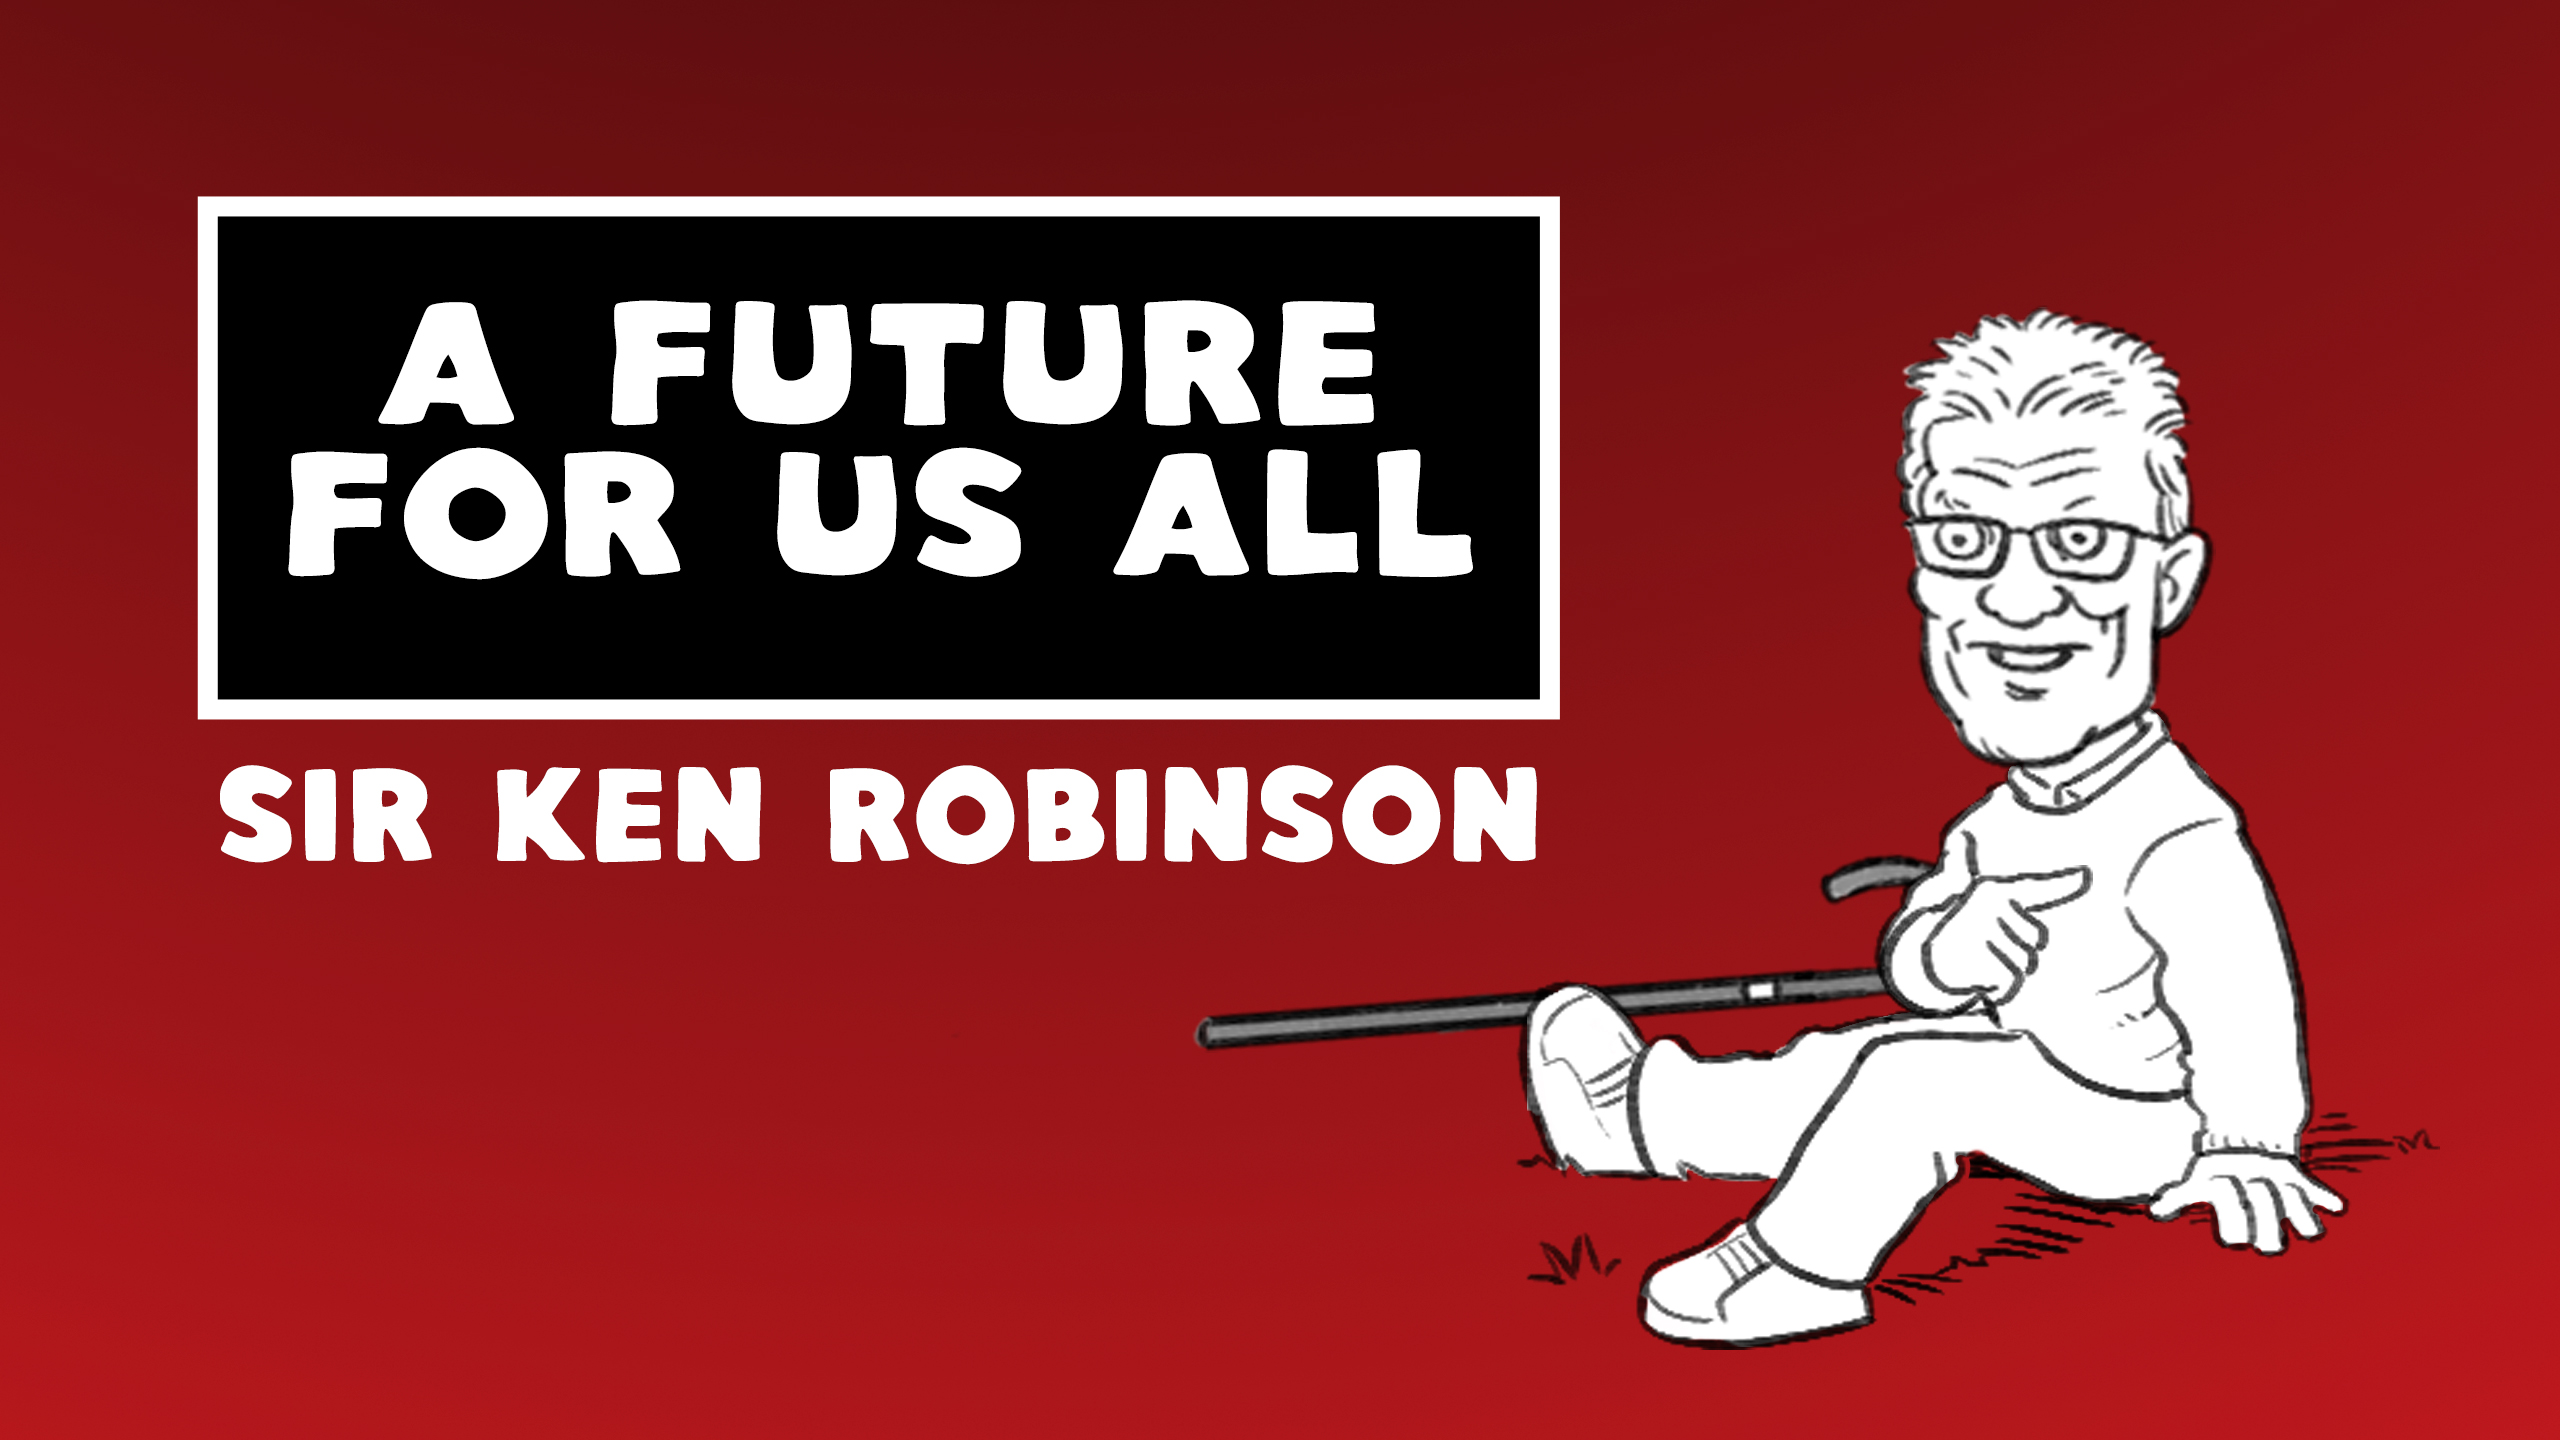 NEW FILM: ‘A Future for Us All’